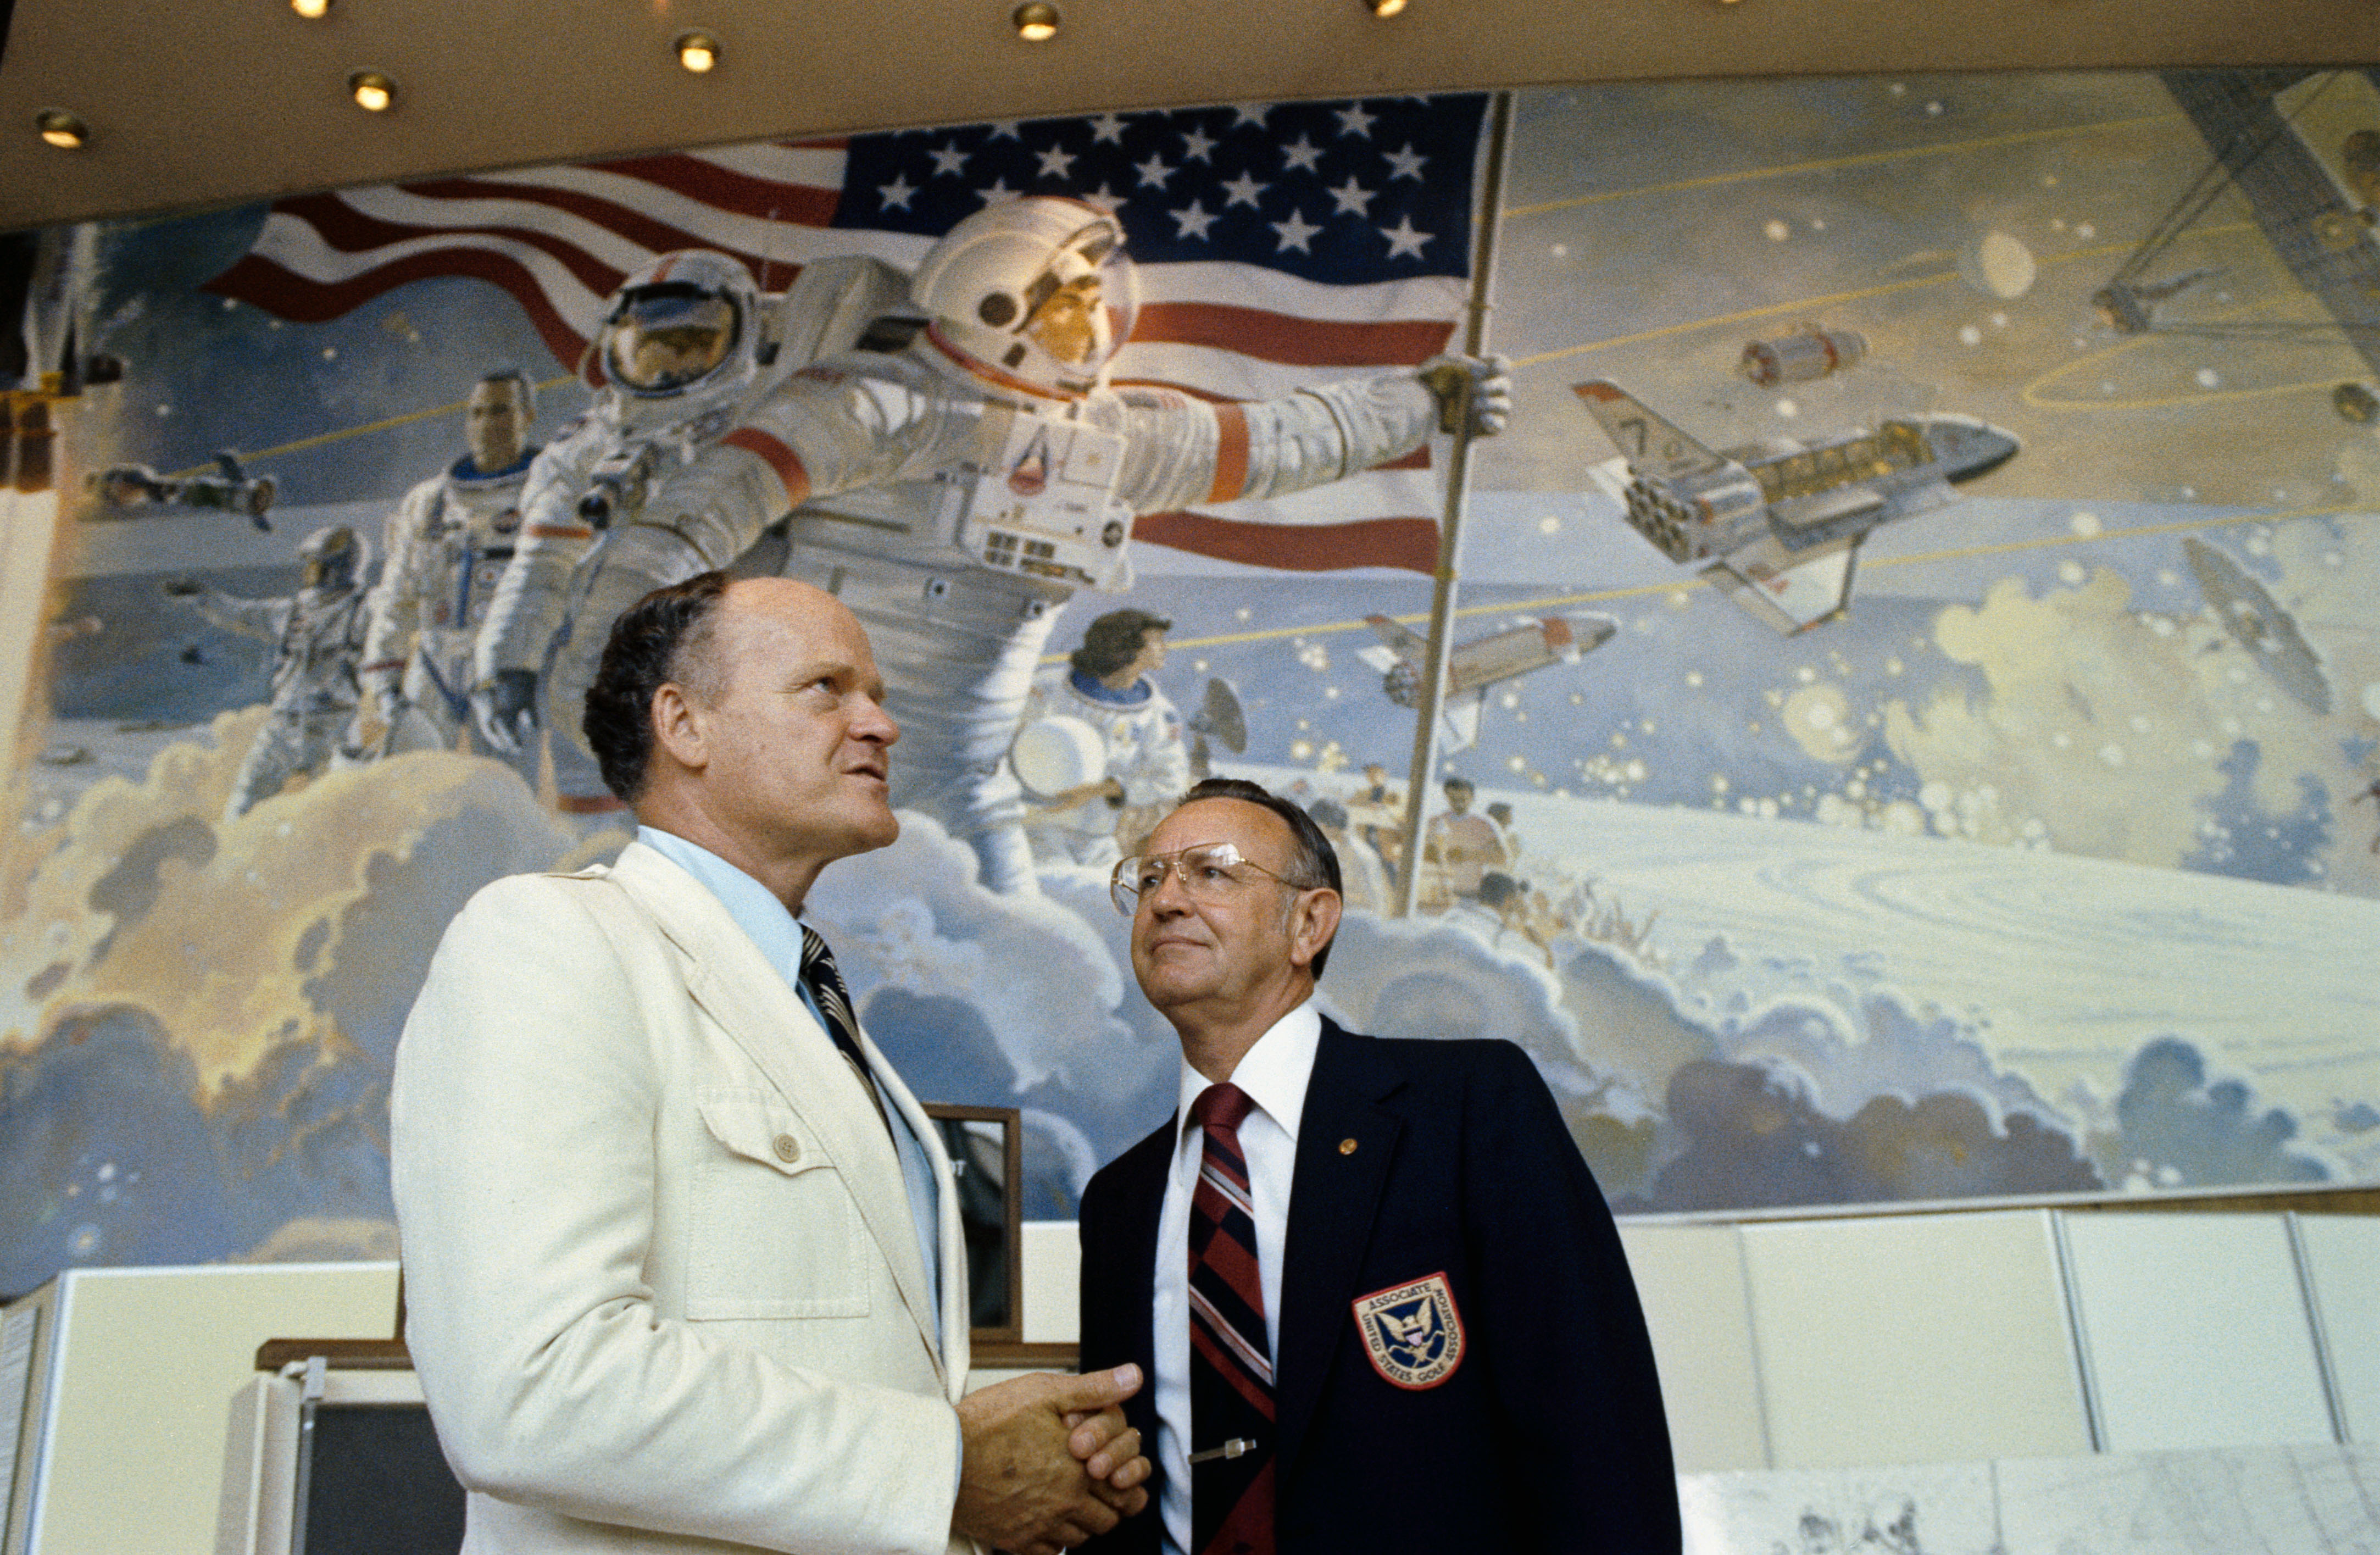 Robert T. McCall and Chris Kraft standing in front of the mural in JSC's Visitor Center (Building 2).